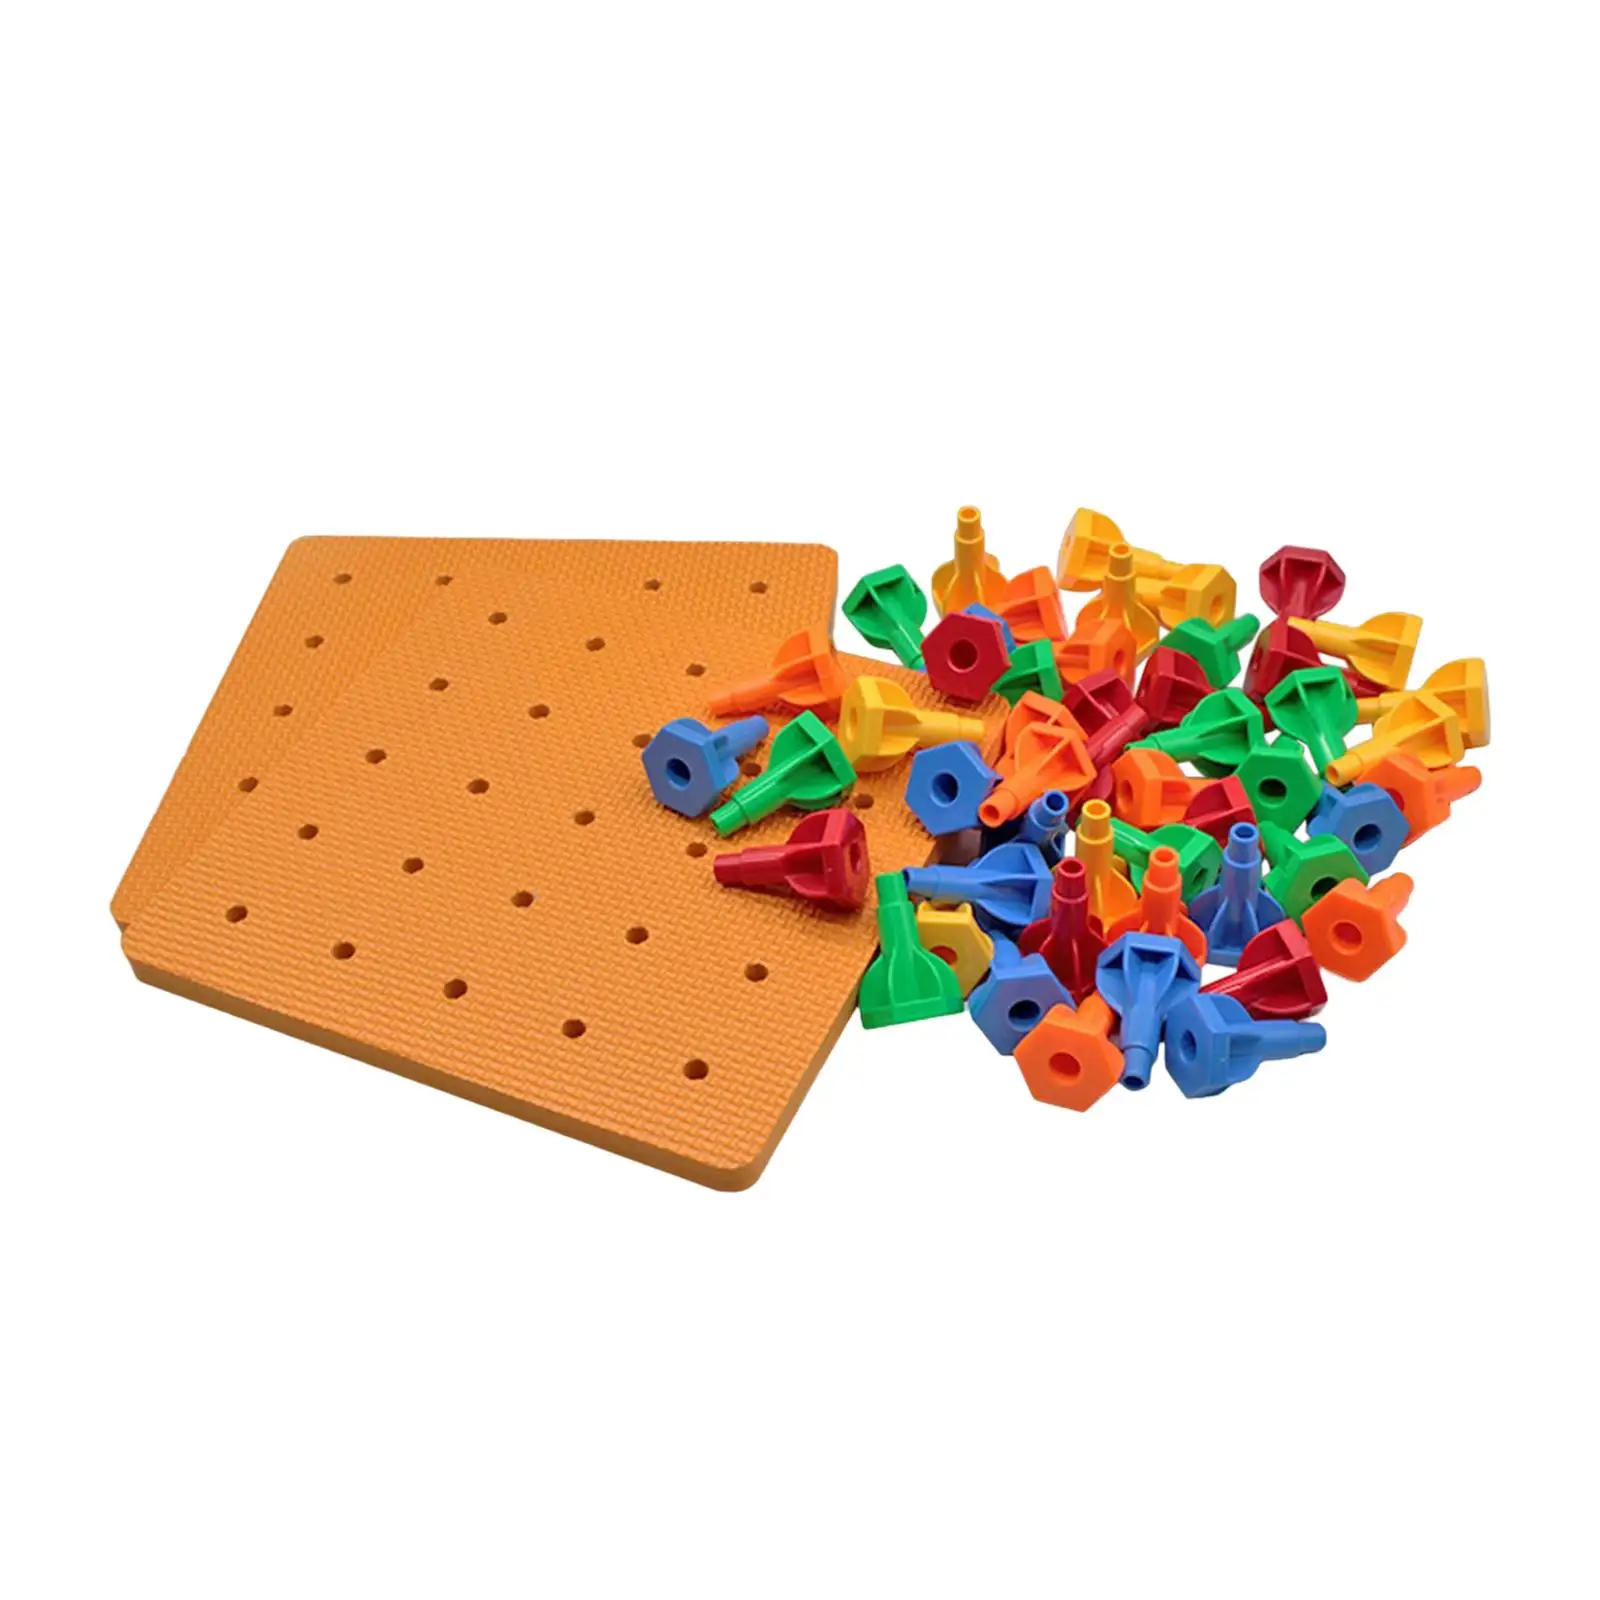 Peg Board Toys Color Sorting Gifts Preschools Learning Set Colorful Educational Toys for Girls Boys Kids Children Toddlers